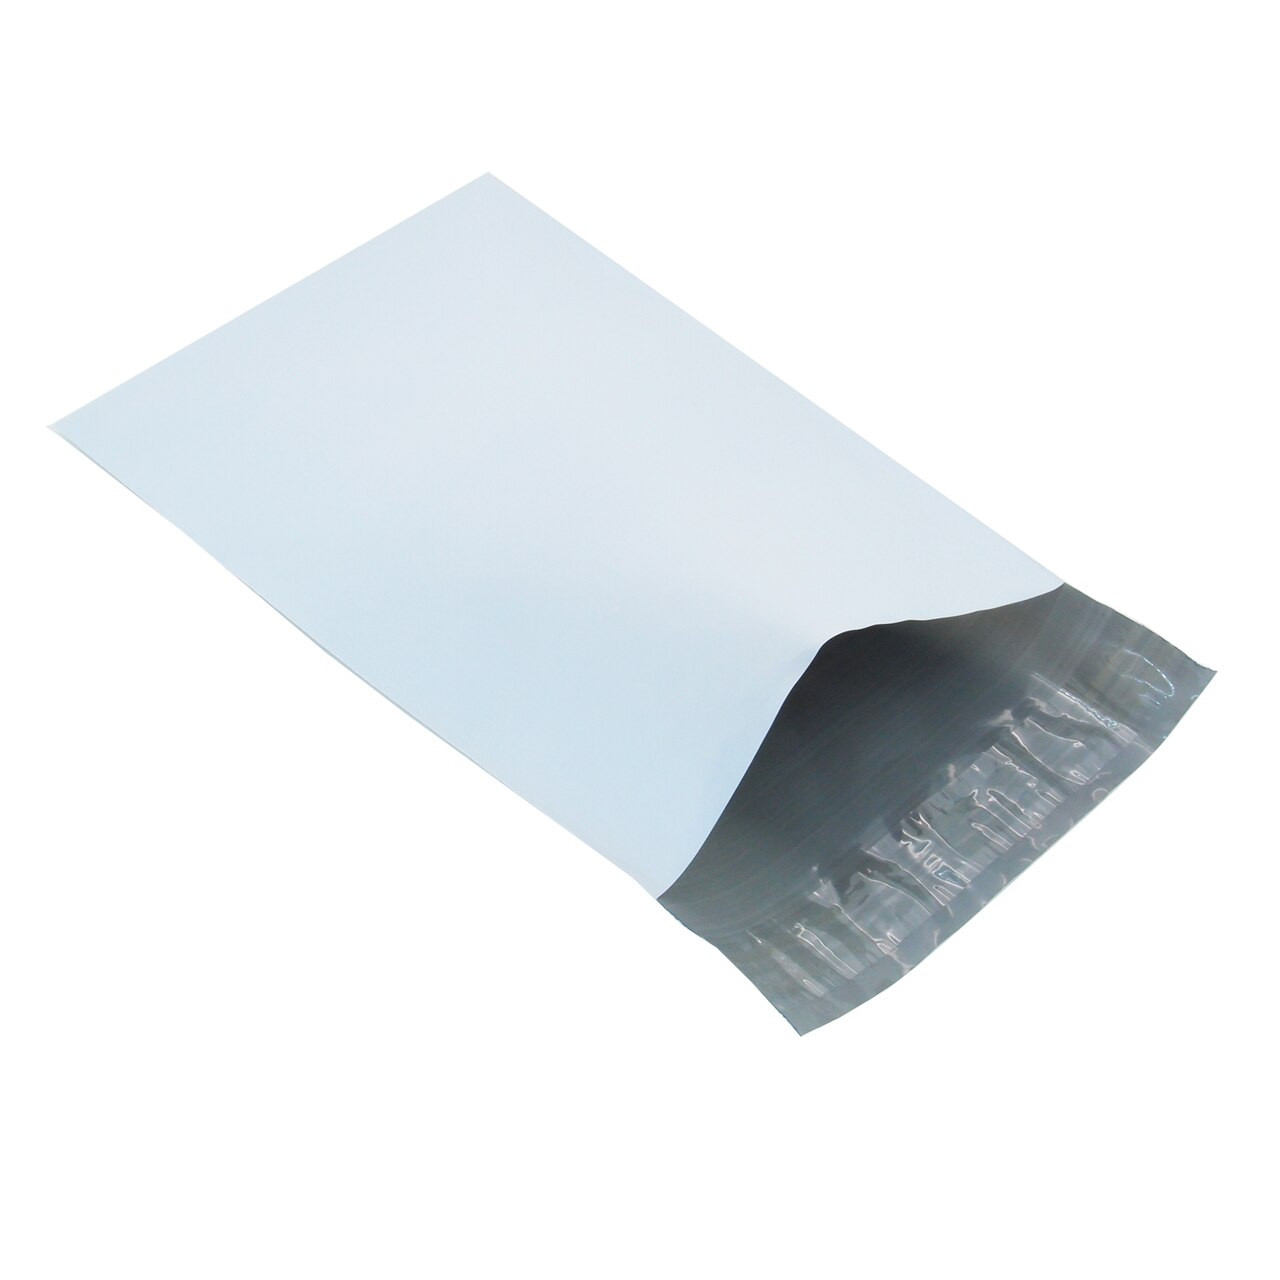 Progo 8.25x10.75 inch Self-seal Poly Mailers. Tear-proof, Water